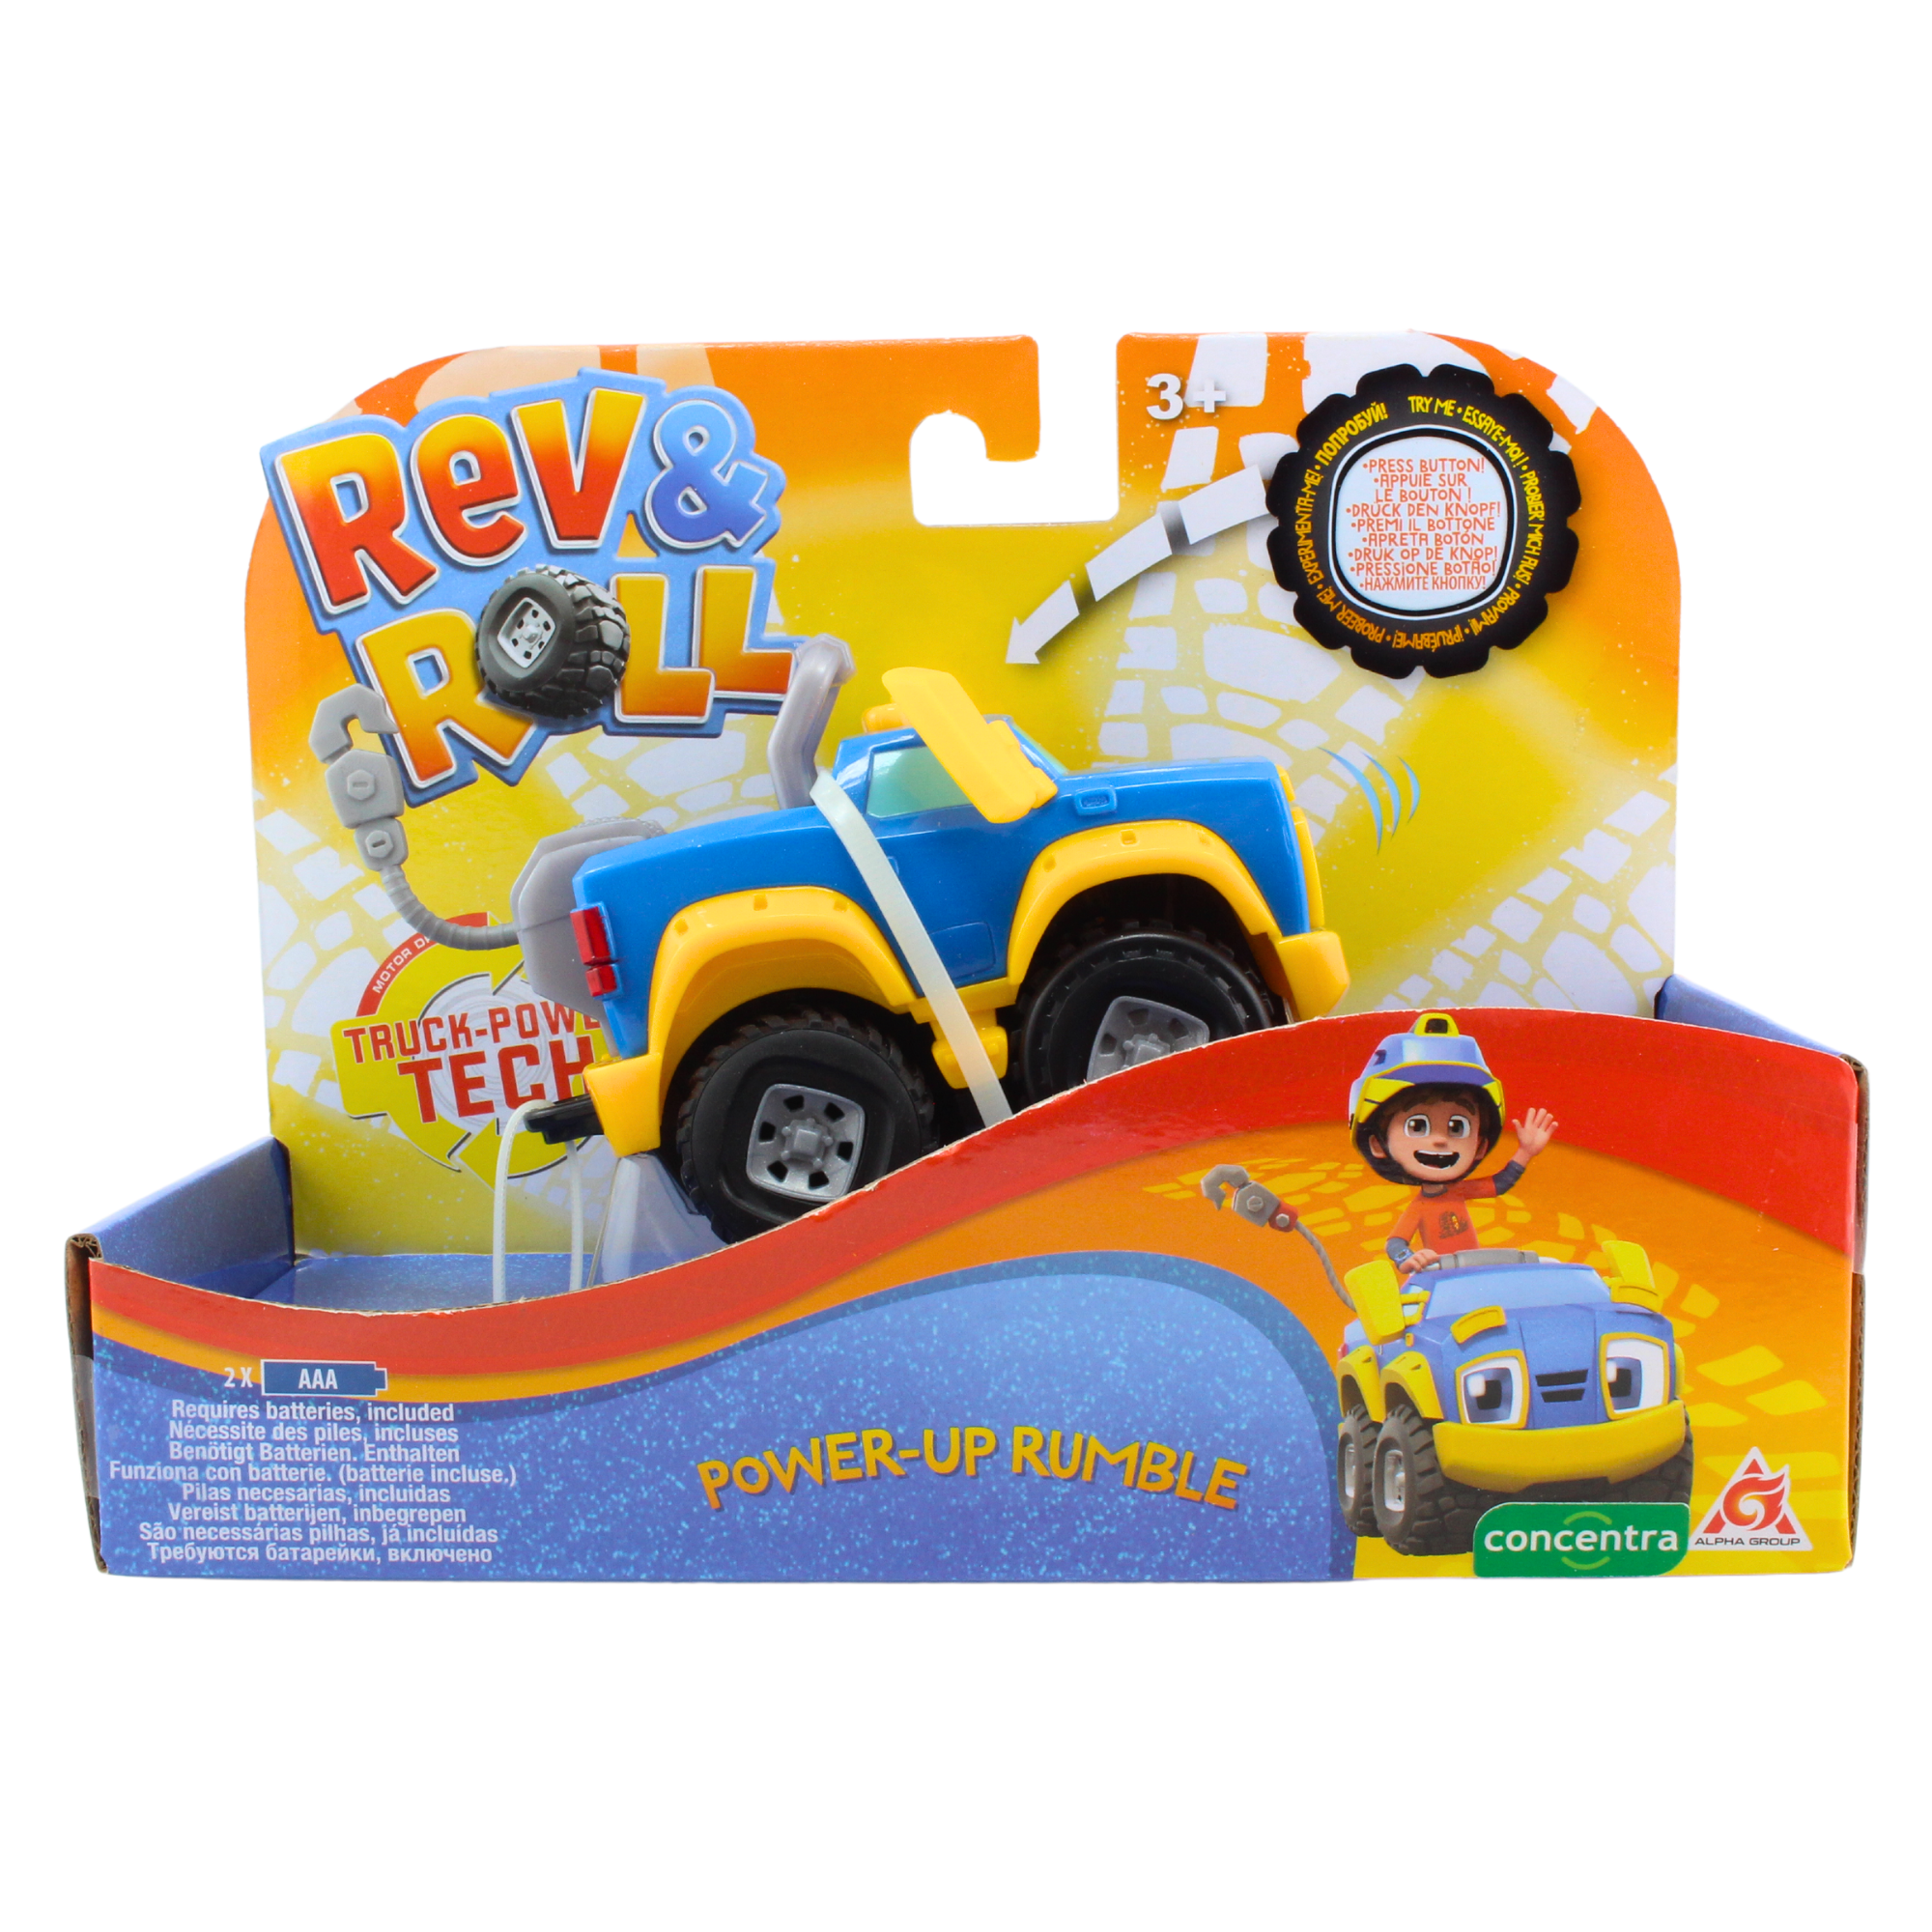 Rev and Roll Power Up Motorised Toy Vehicle - Power-Up Rumble